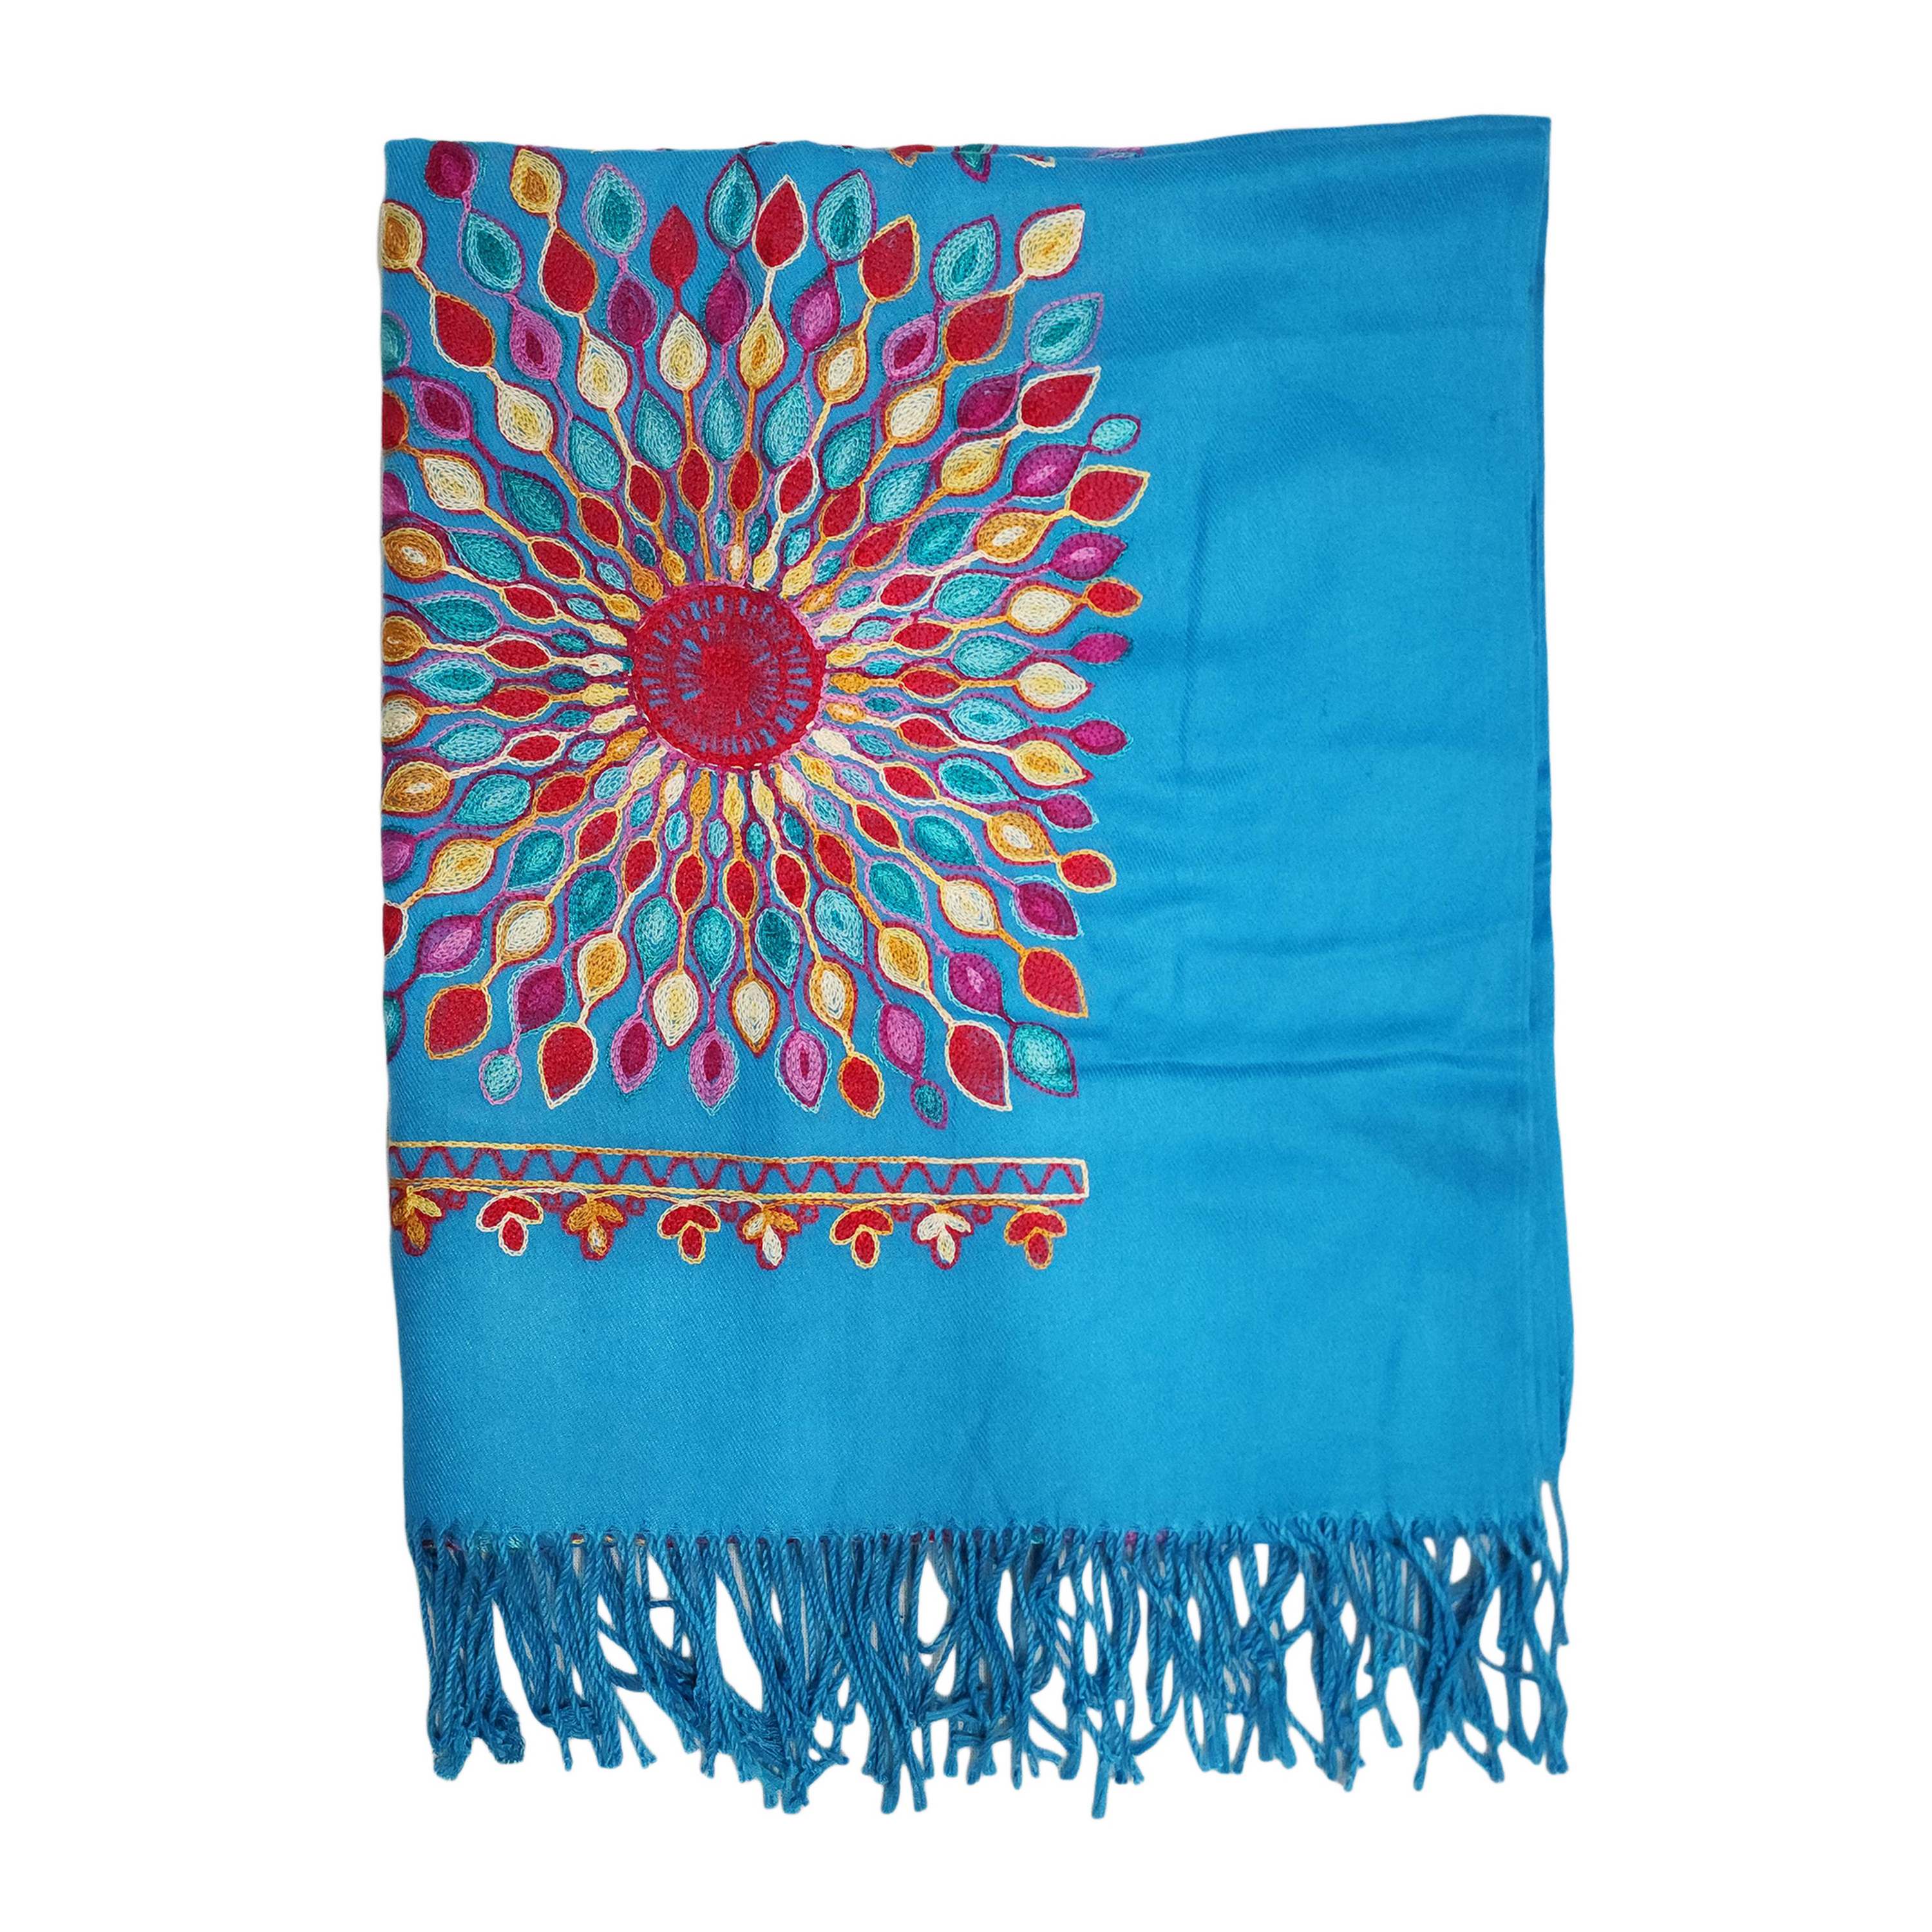 Desigener Shawl, Thick Nepali Shawl, With Heavy Embroidery, Color sky Blue